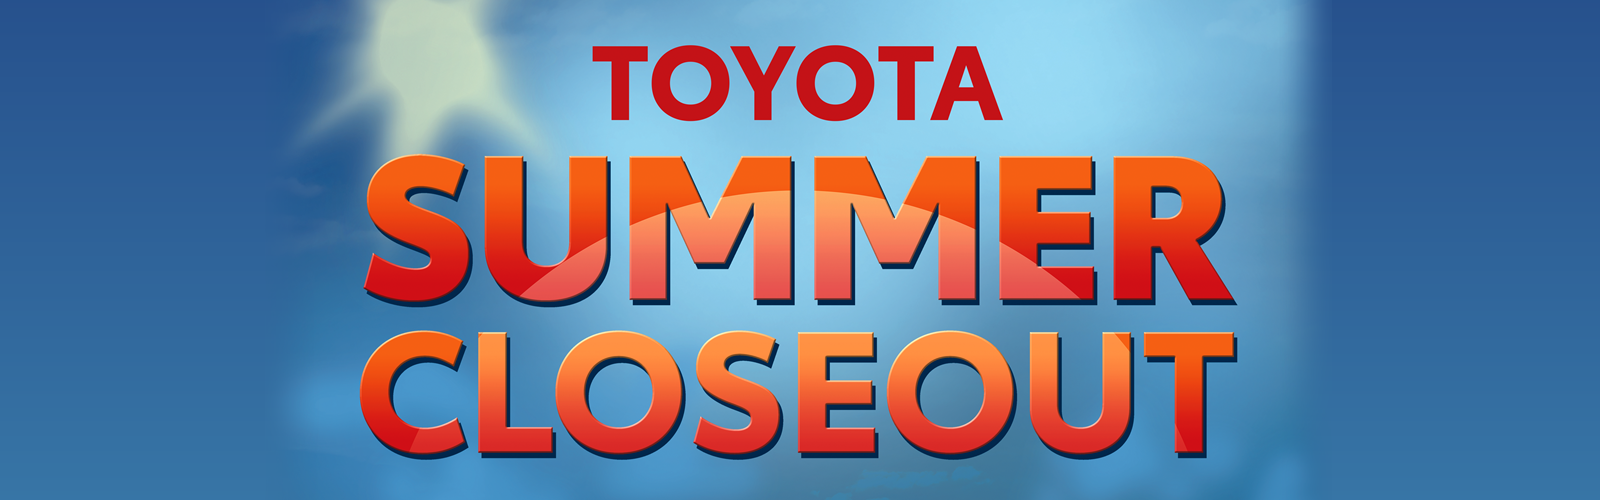 Toyota Summer Closeout Sales Event